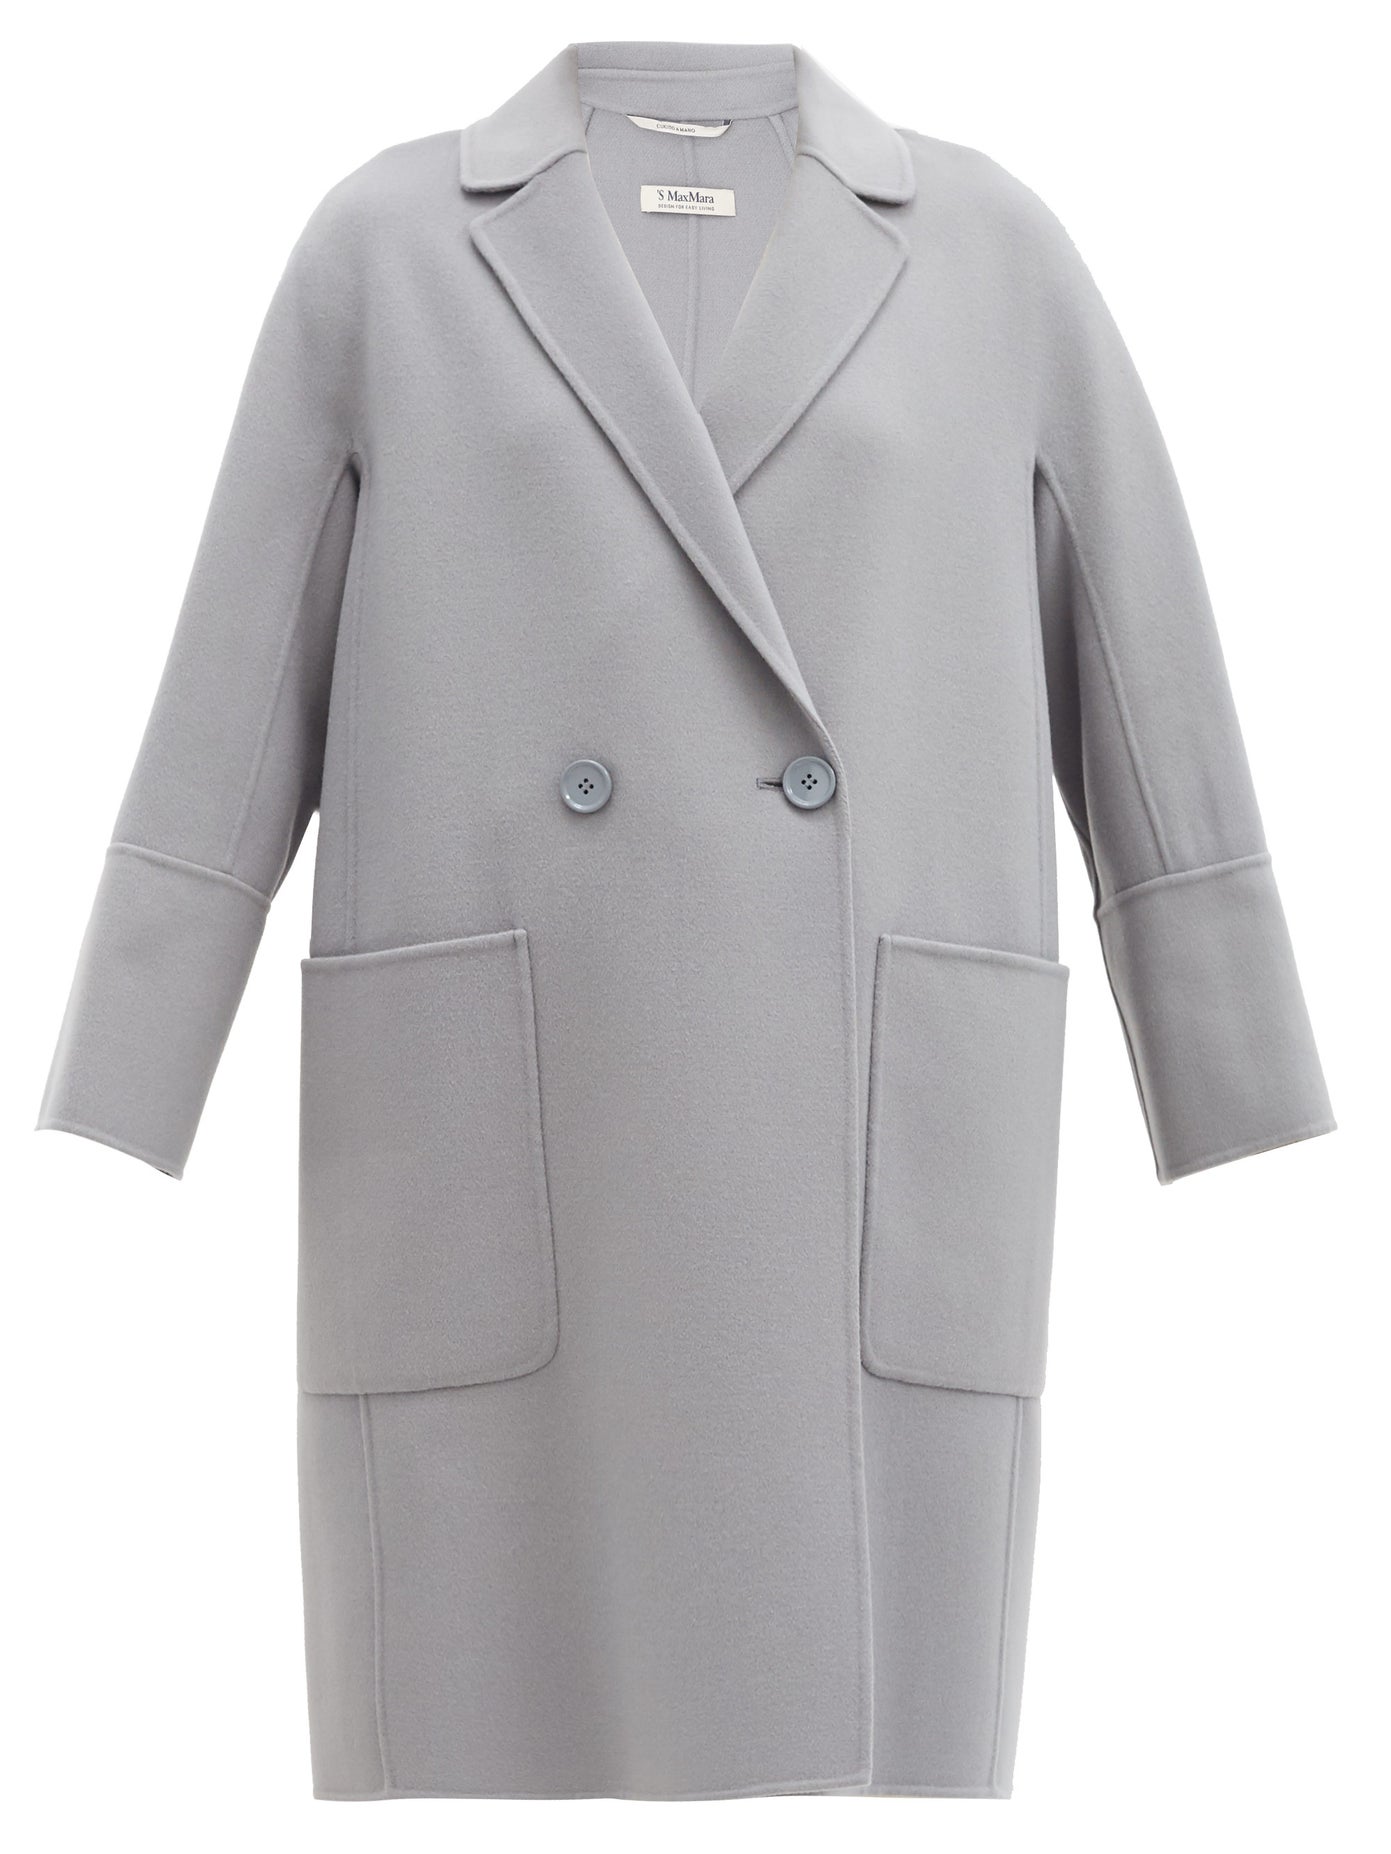 S Max Mara - Audrey Coat - Light Grey | ABOUT ICONS